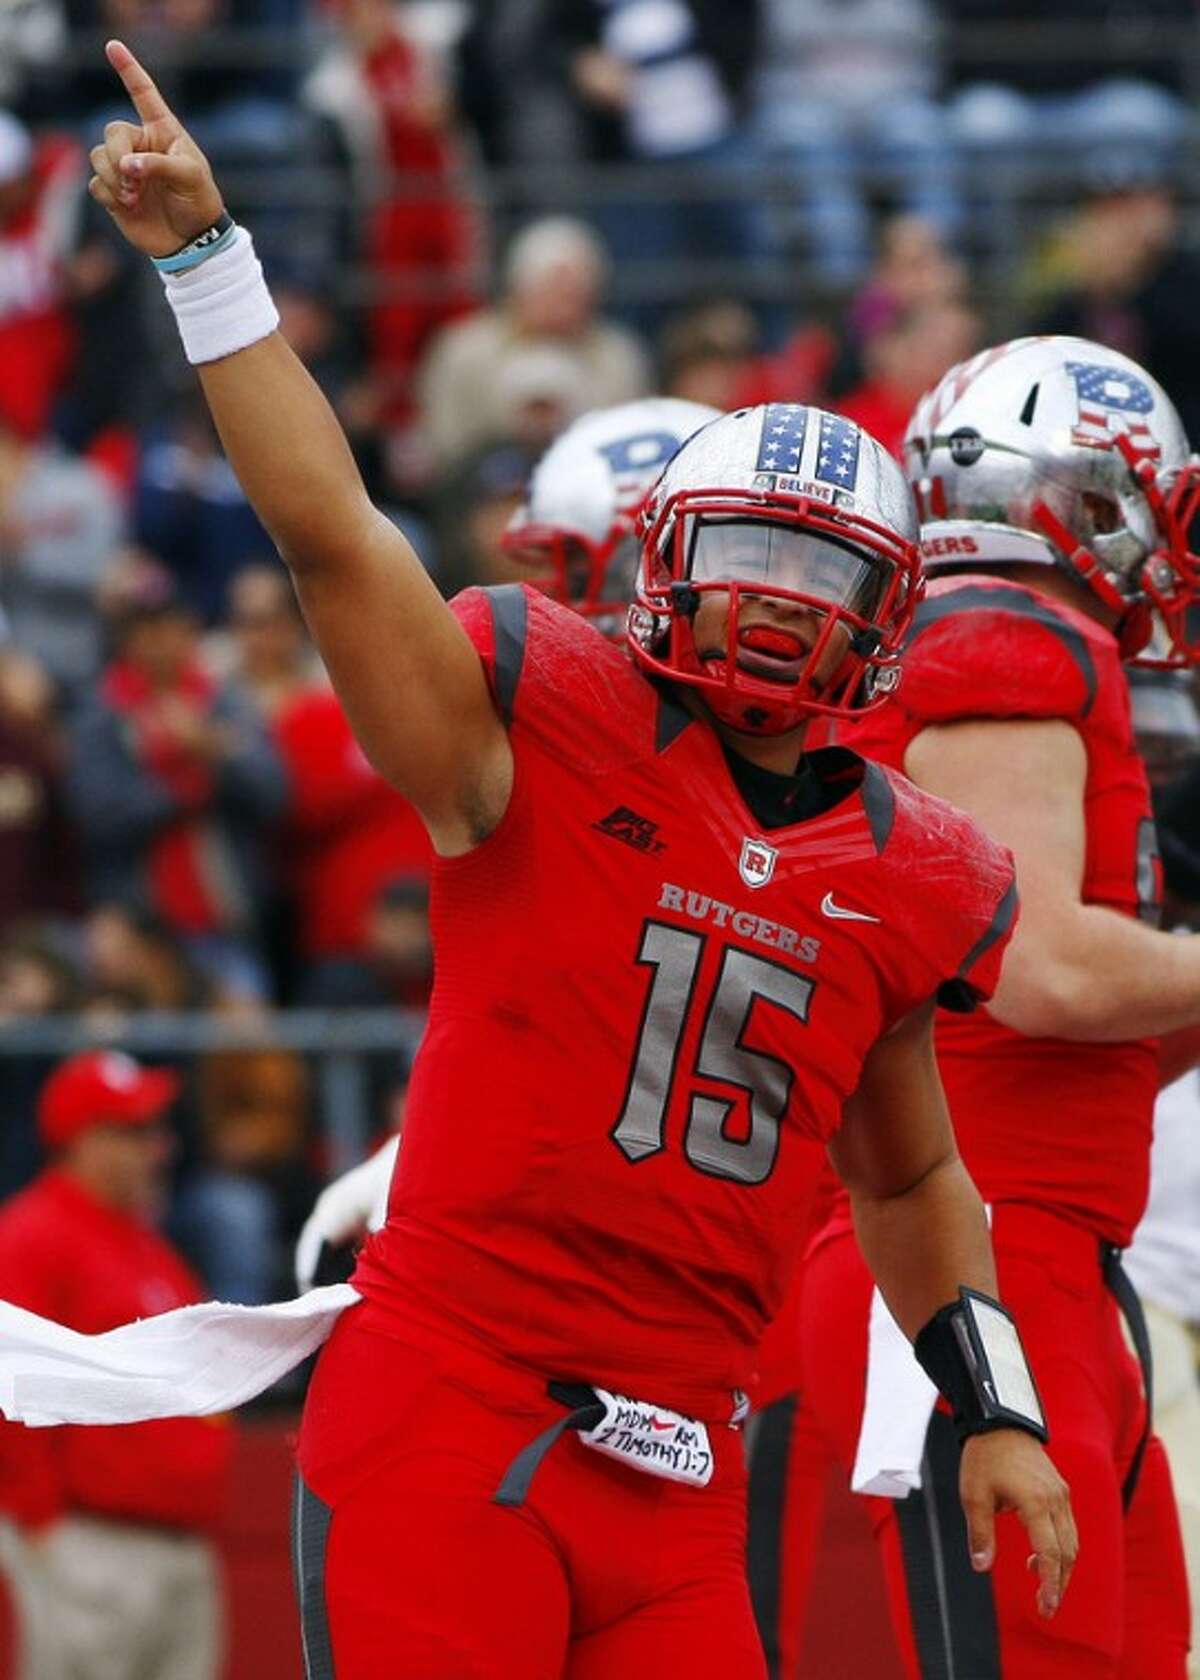 FILe p- This Nov. 10, 2012 file photo shows Rutgers quarterback Gary Nova (15) gesturing after a touchdown pass against Army in first half of an NCAA college football game in Piscataway, N.J. . Rutgers is announcing that it will join the Big Ten at an afternoon news conference Tuesday, Nov. 20, 2012, on its campus in Piscataway, N.J. (AP Photo/Rich Schultz, File)